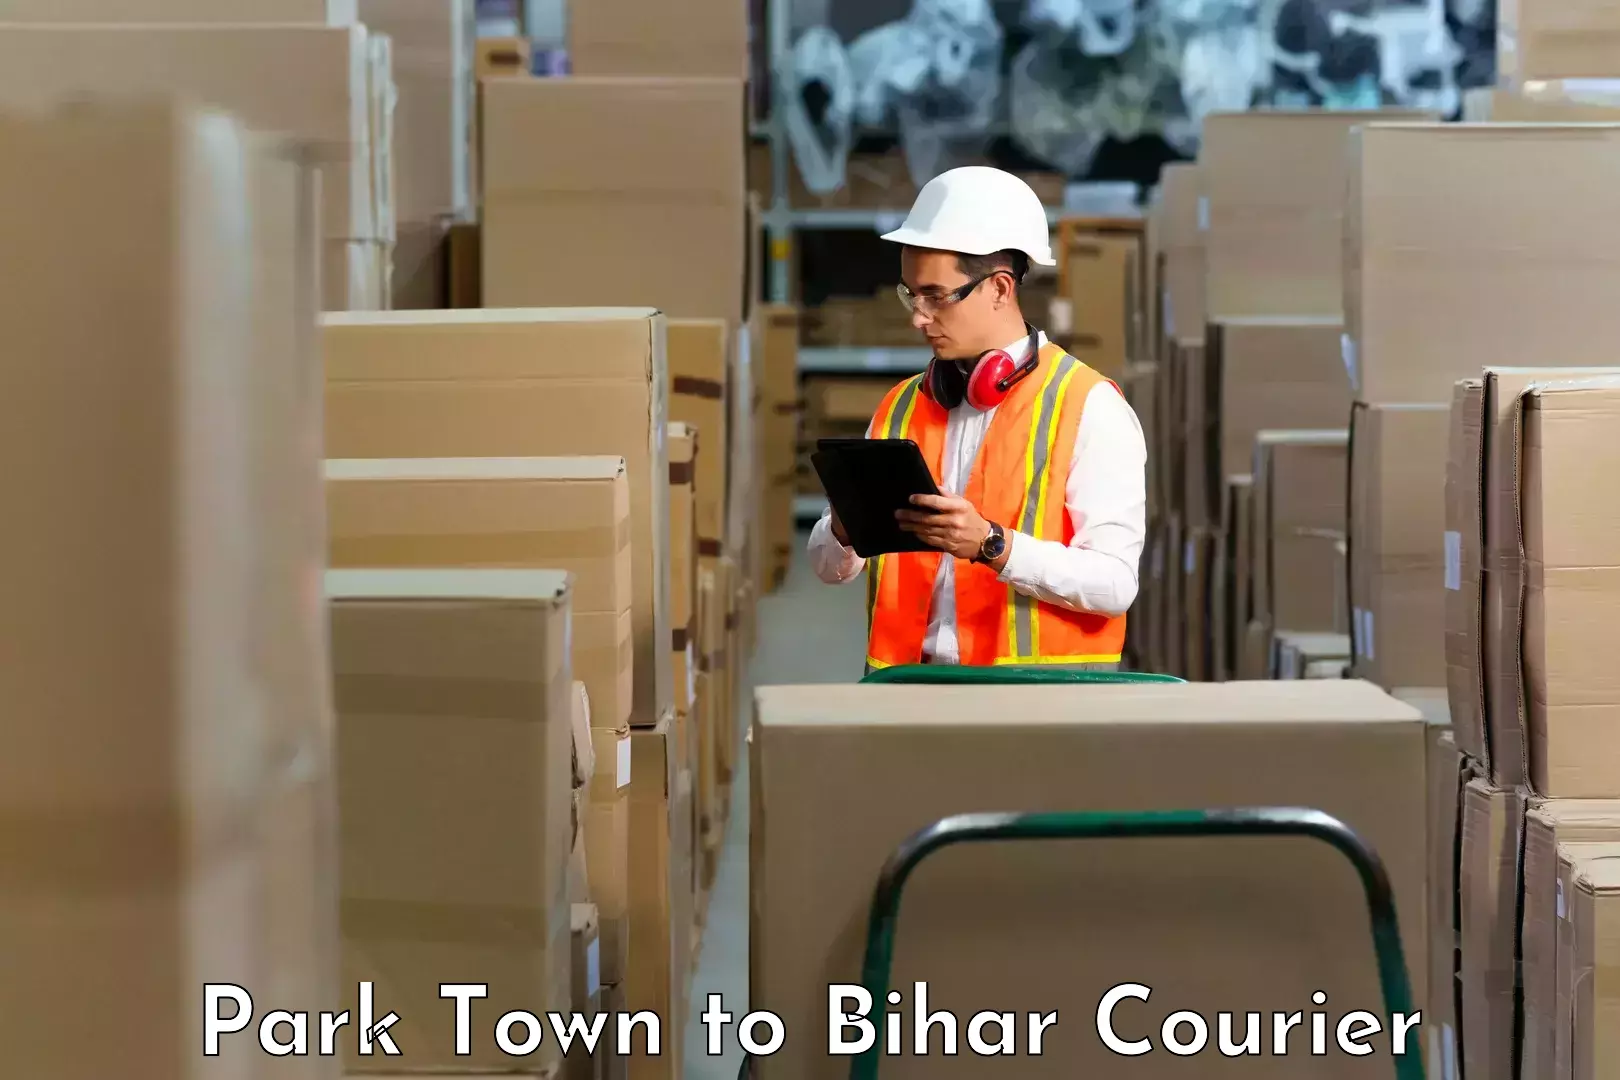 Customer-focused courier Park Town to Bihar